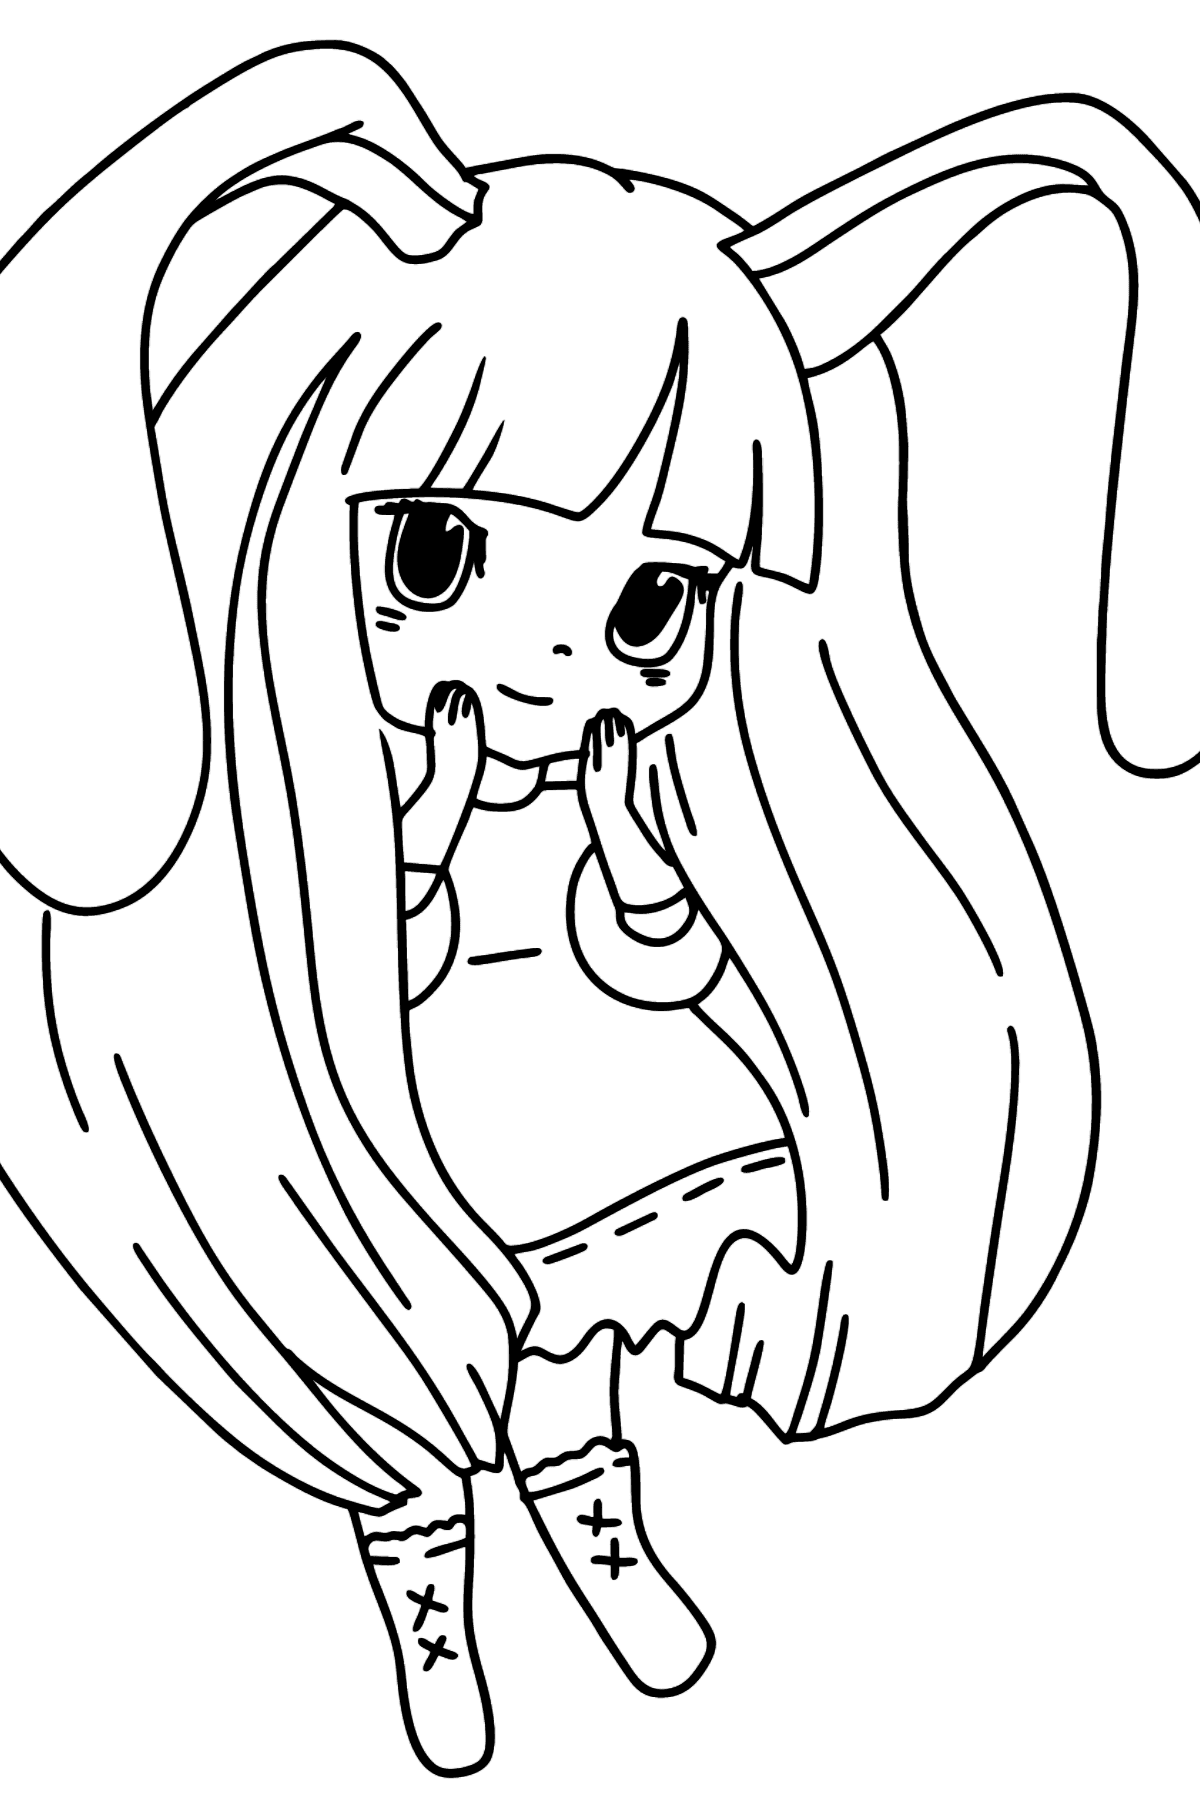  Cute Anime Girl Coloring Pages To Print  Free